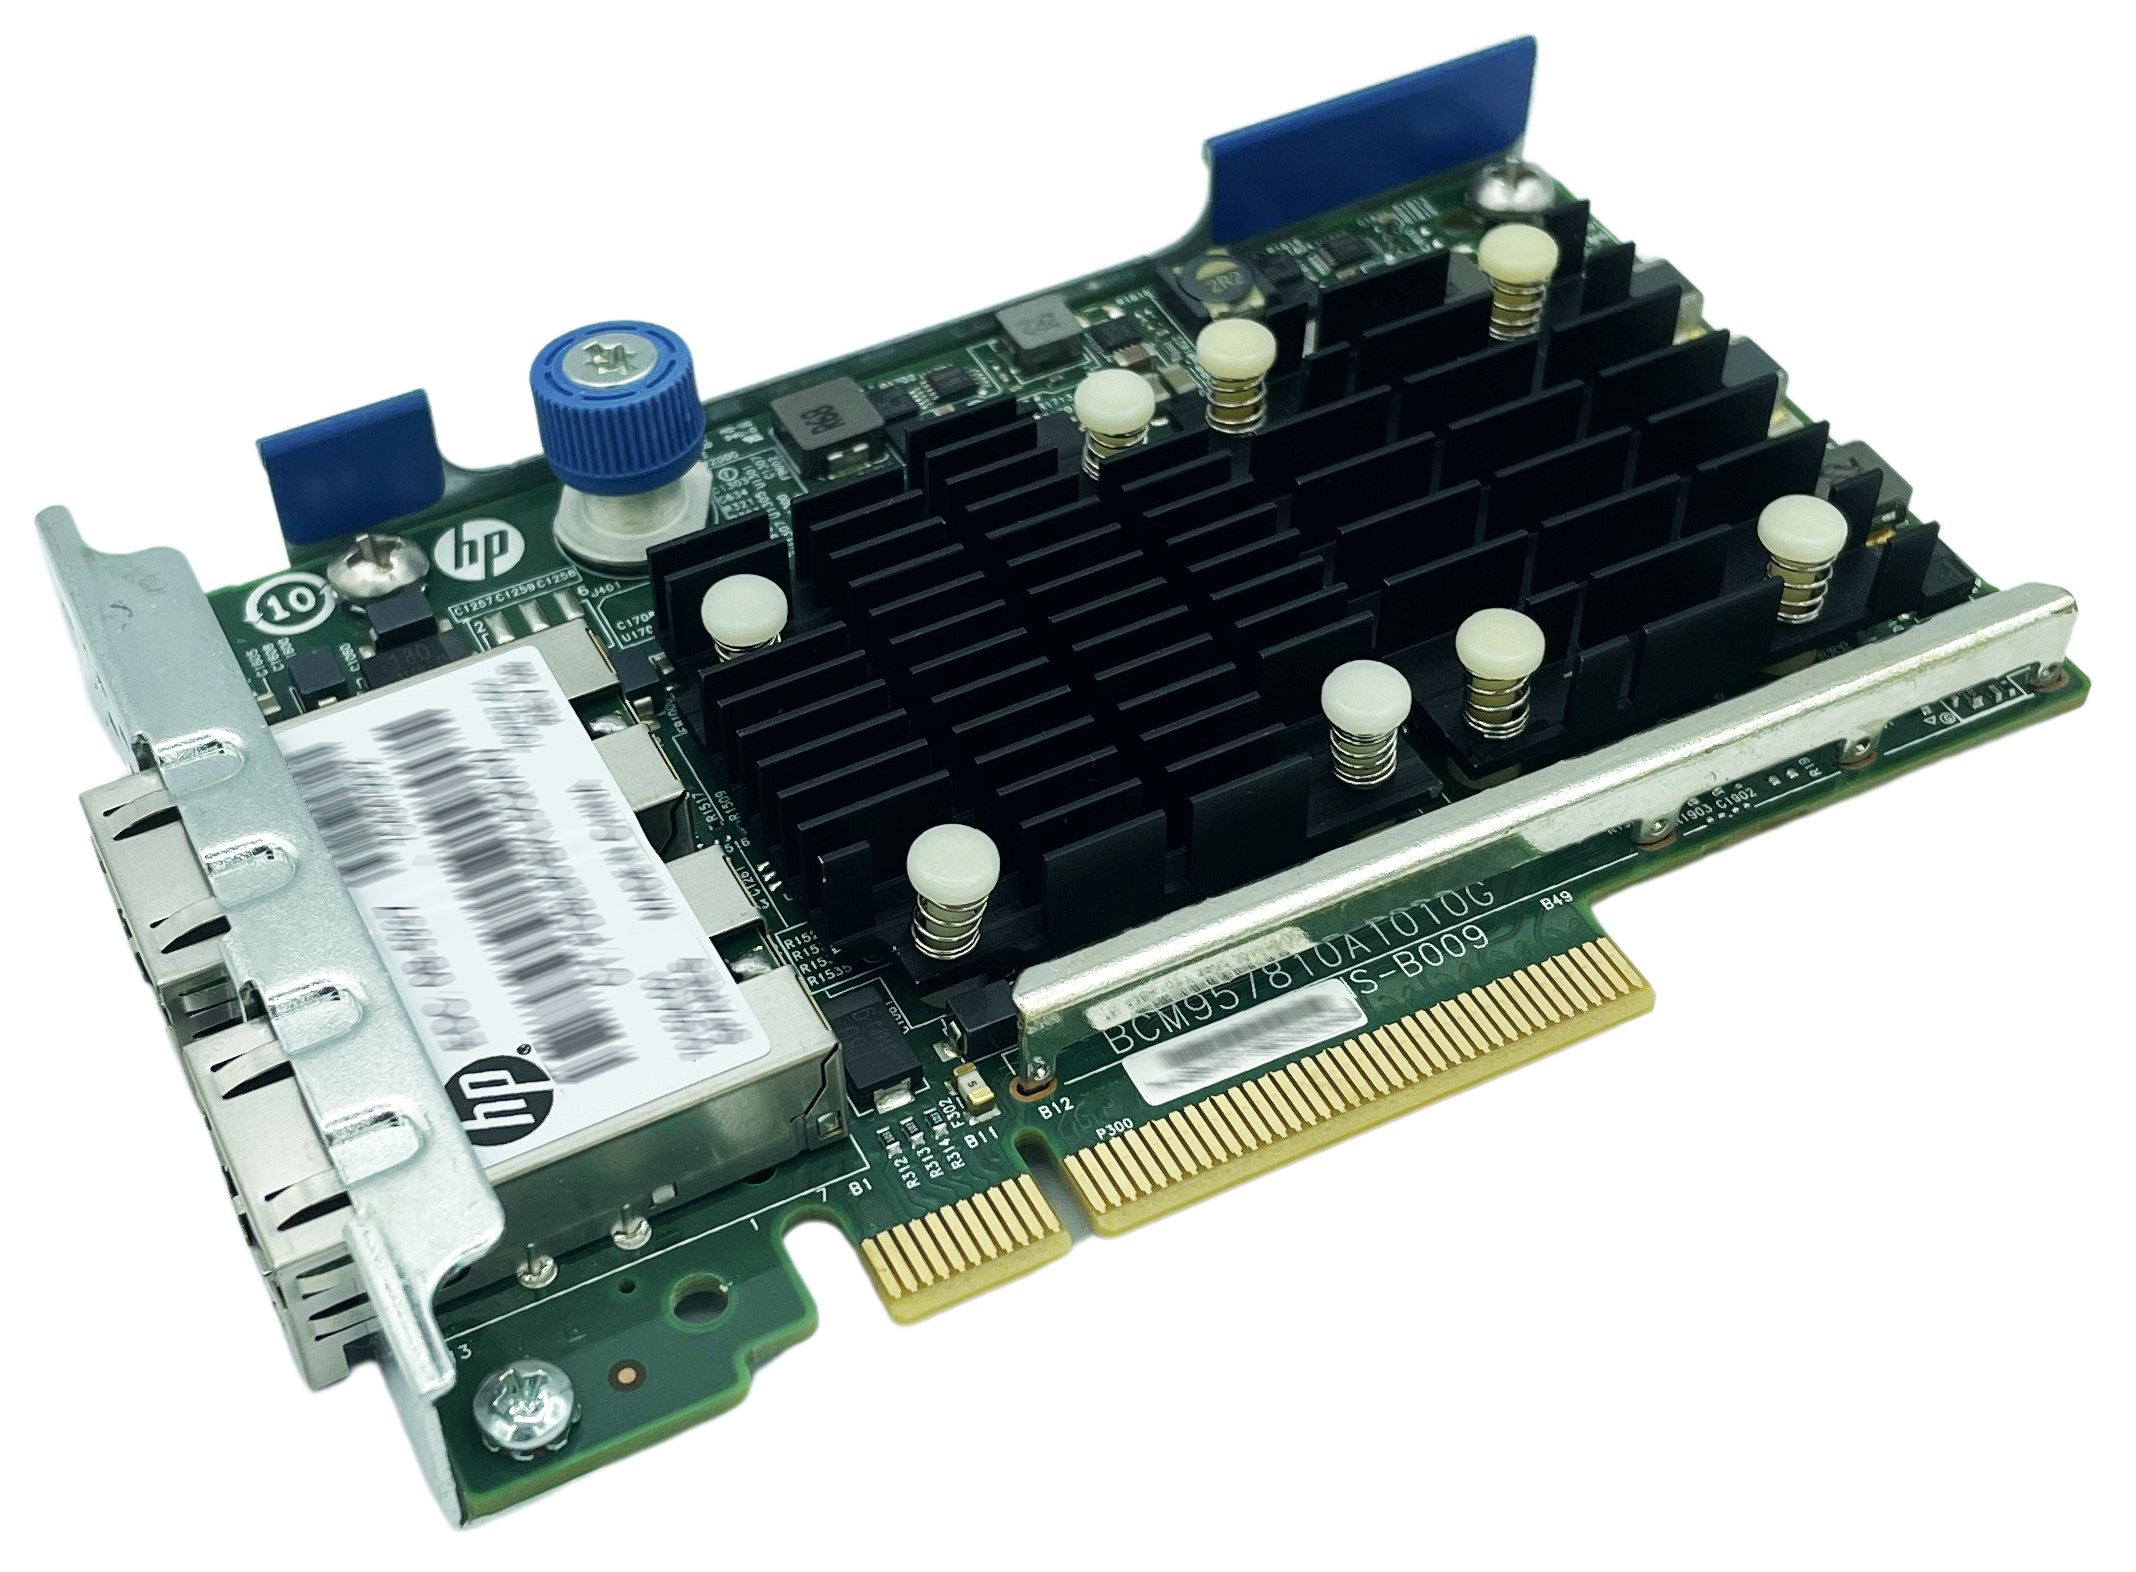 629135R-B21 HPE Ethernet 1Gb 4P 331FLR Remanufactured Adapter